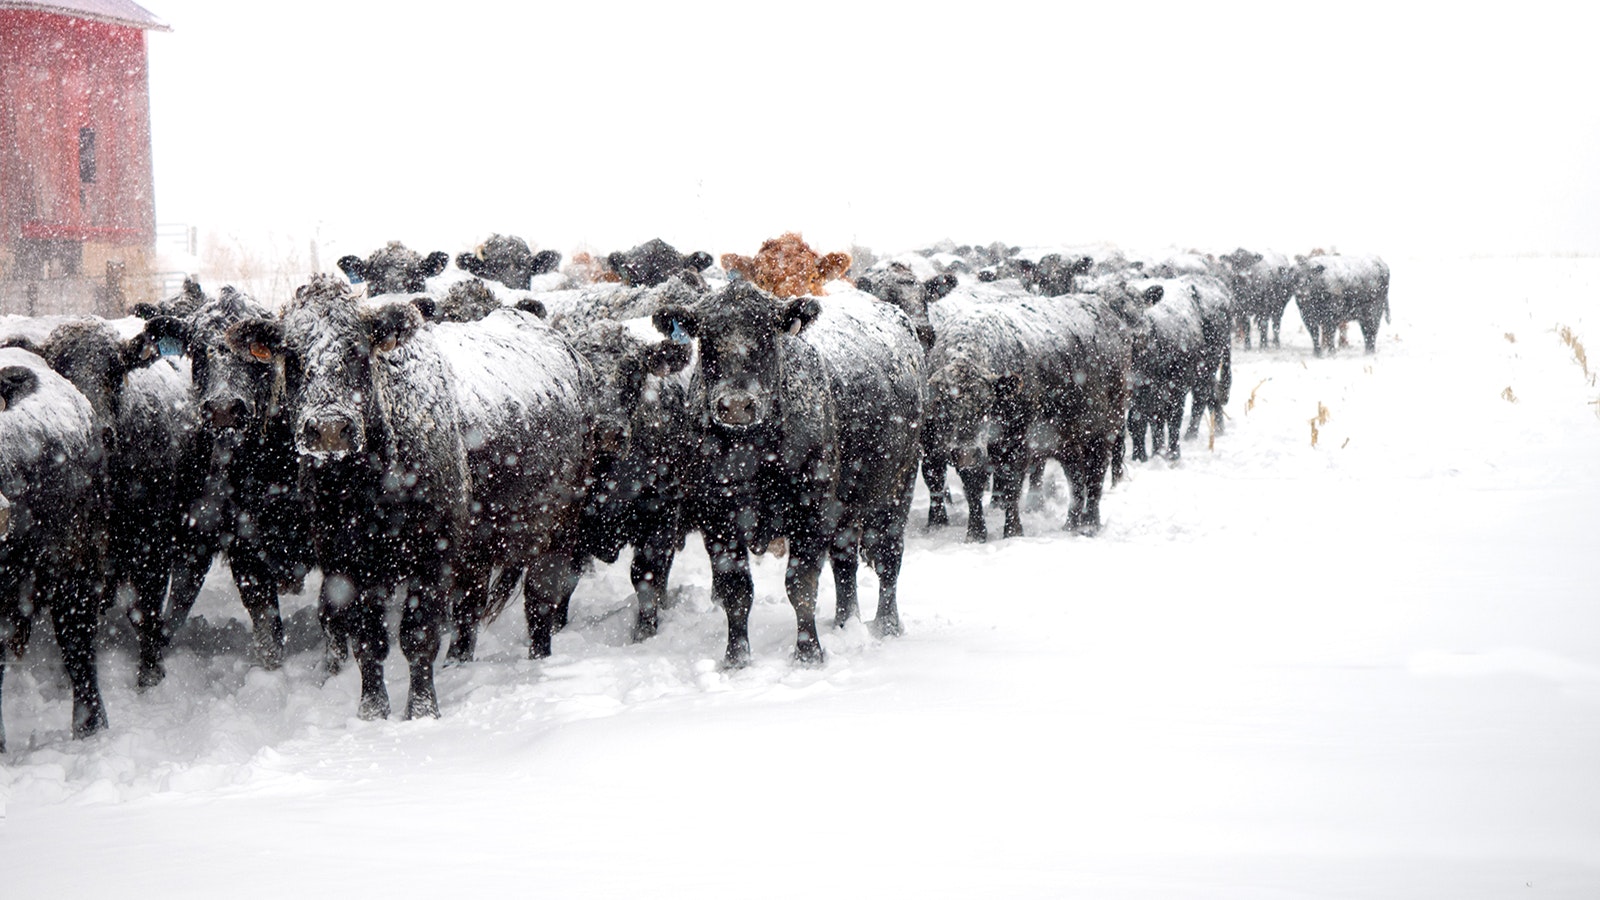 Cows in snow 3 6 23